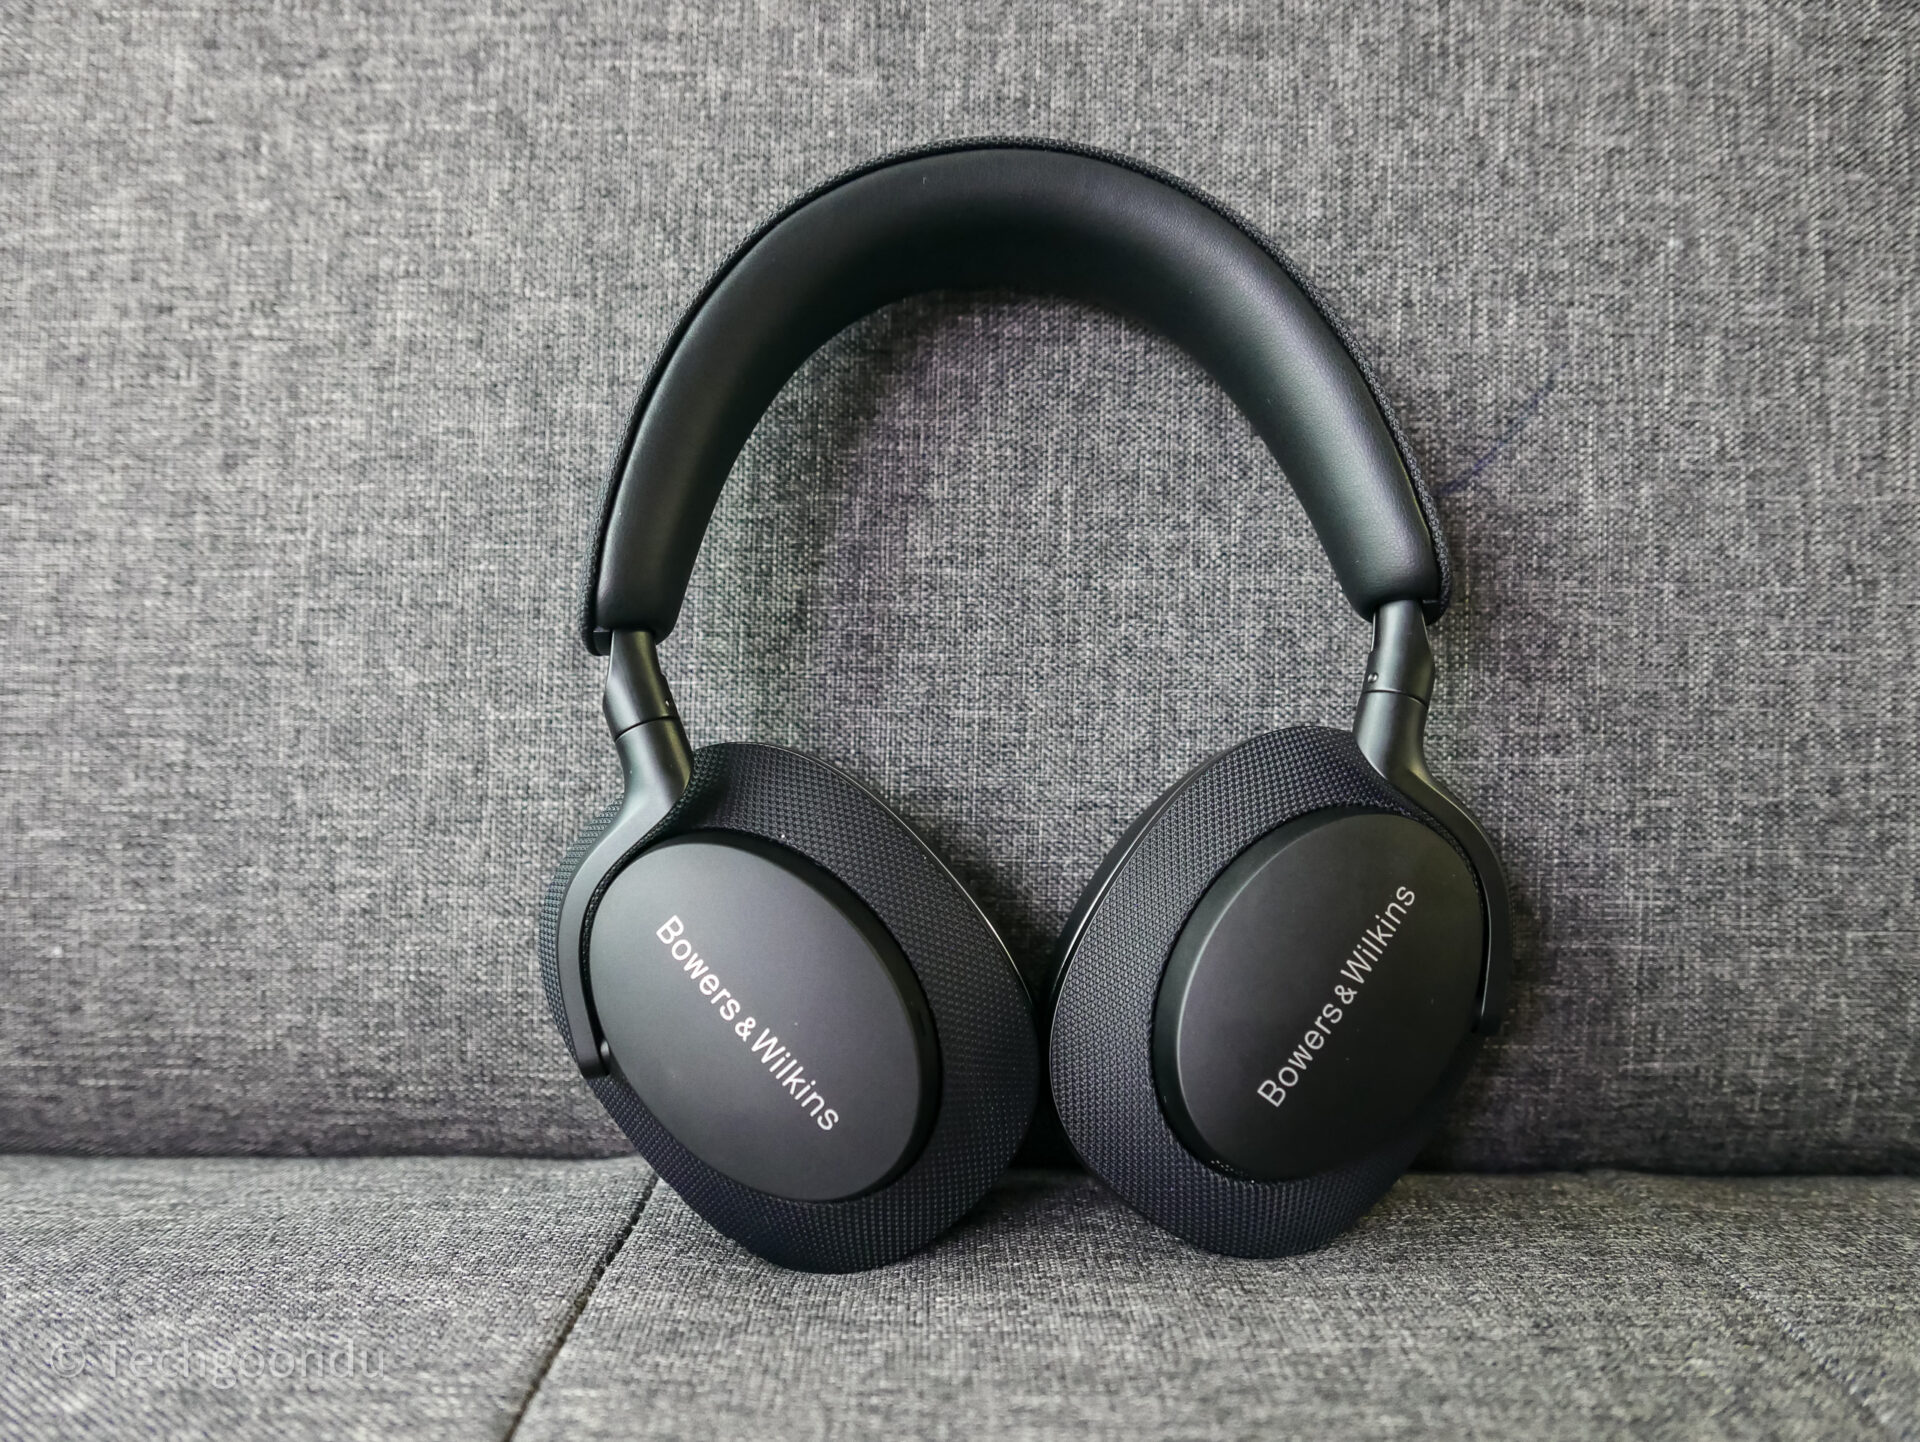 Bowers & Wilkins Px7 S2 review: Headphones with luxurious finish